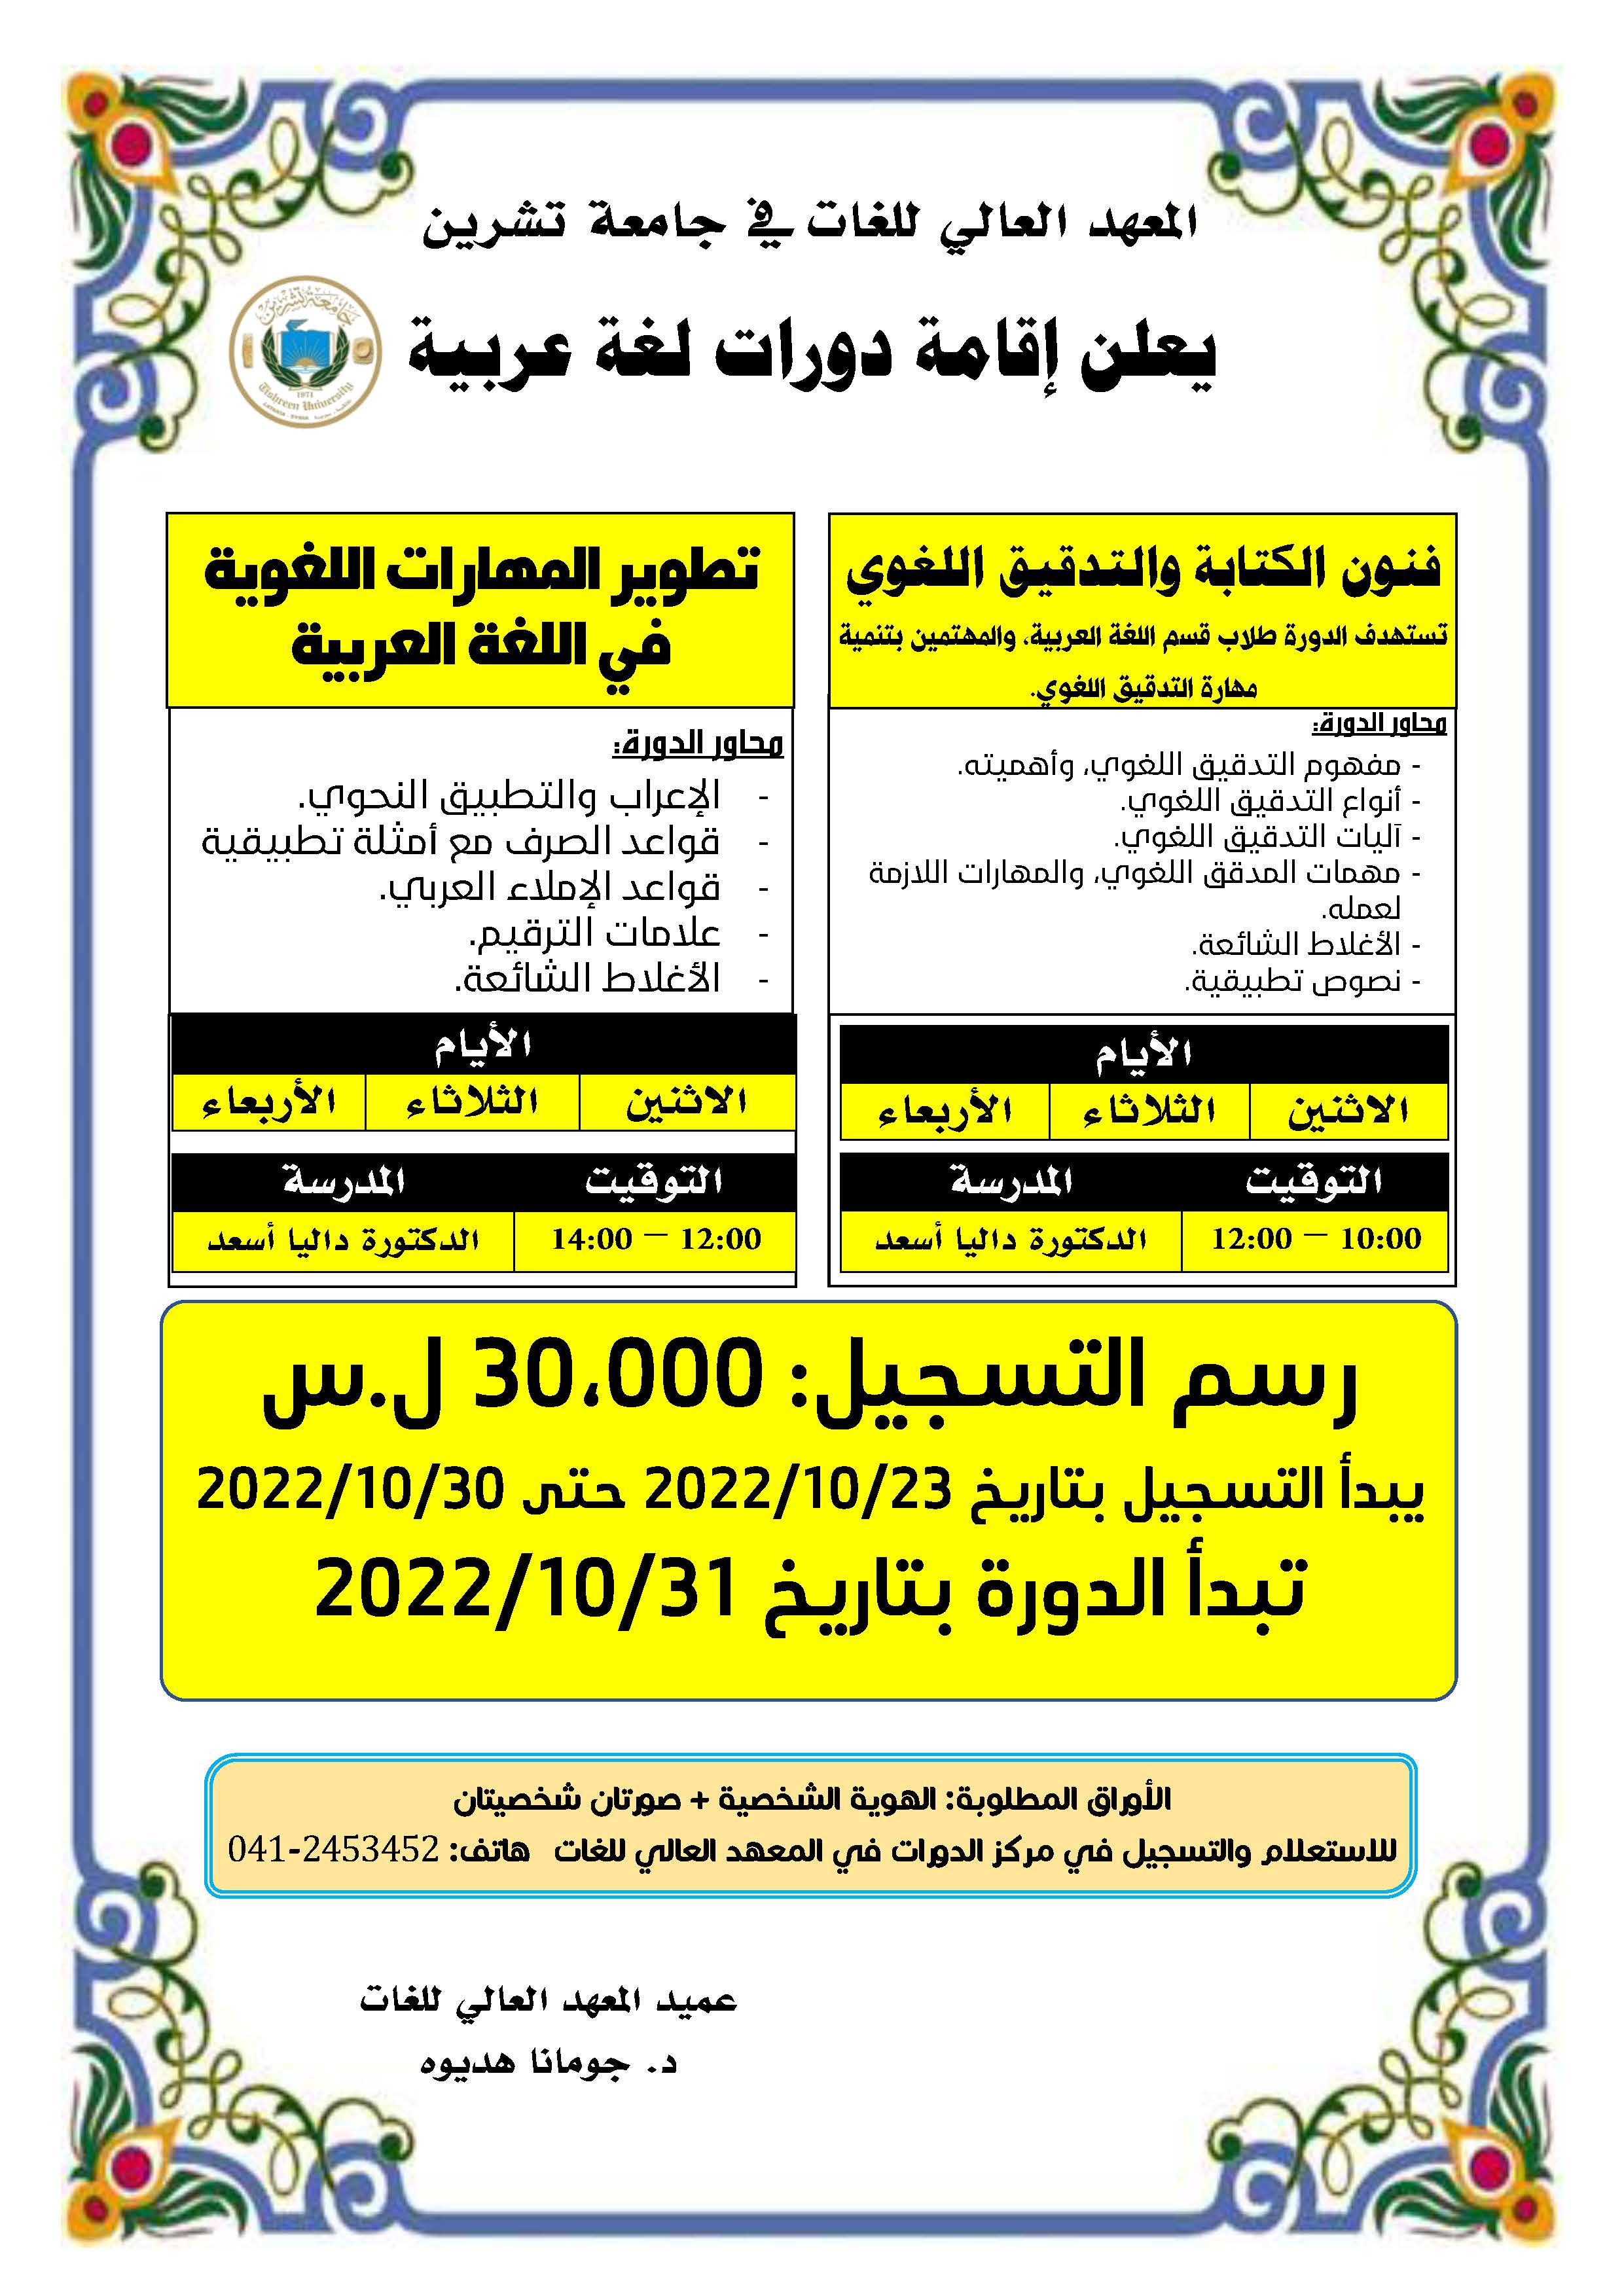 The Higher Institute of Languages ​​announces the establishment of courses in the Arabic language, starting on 10-31-2022